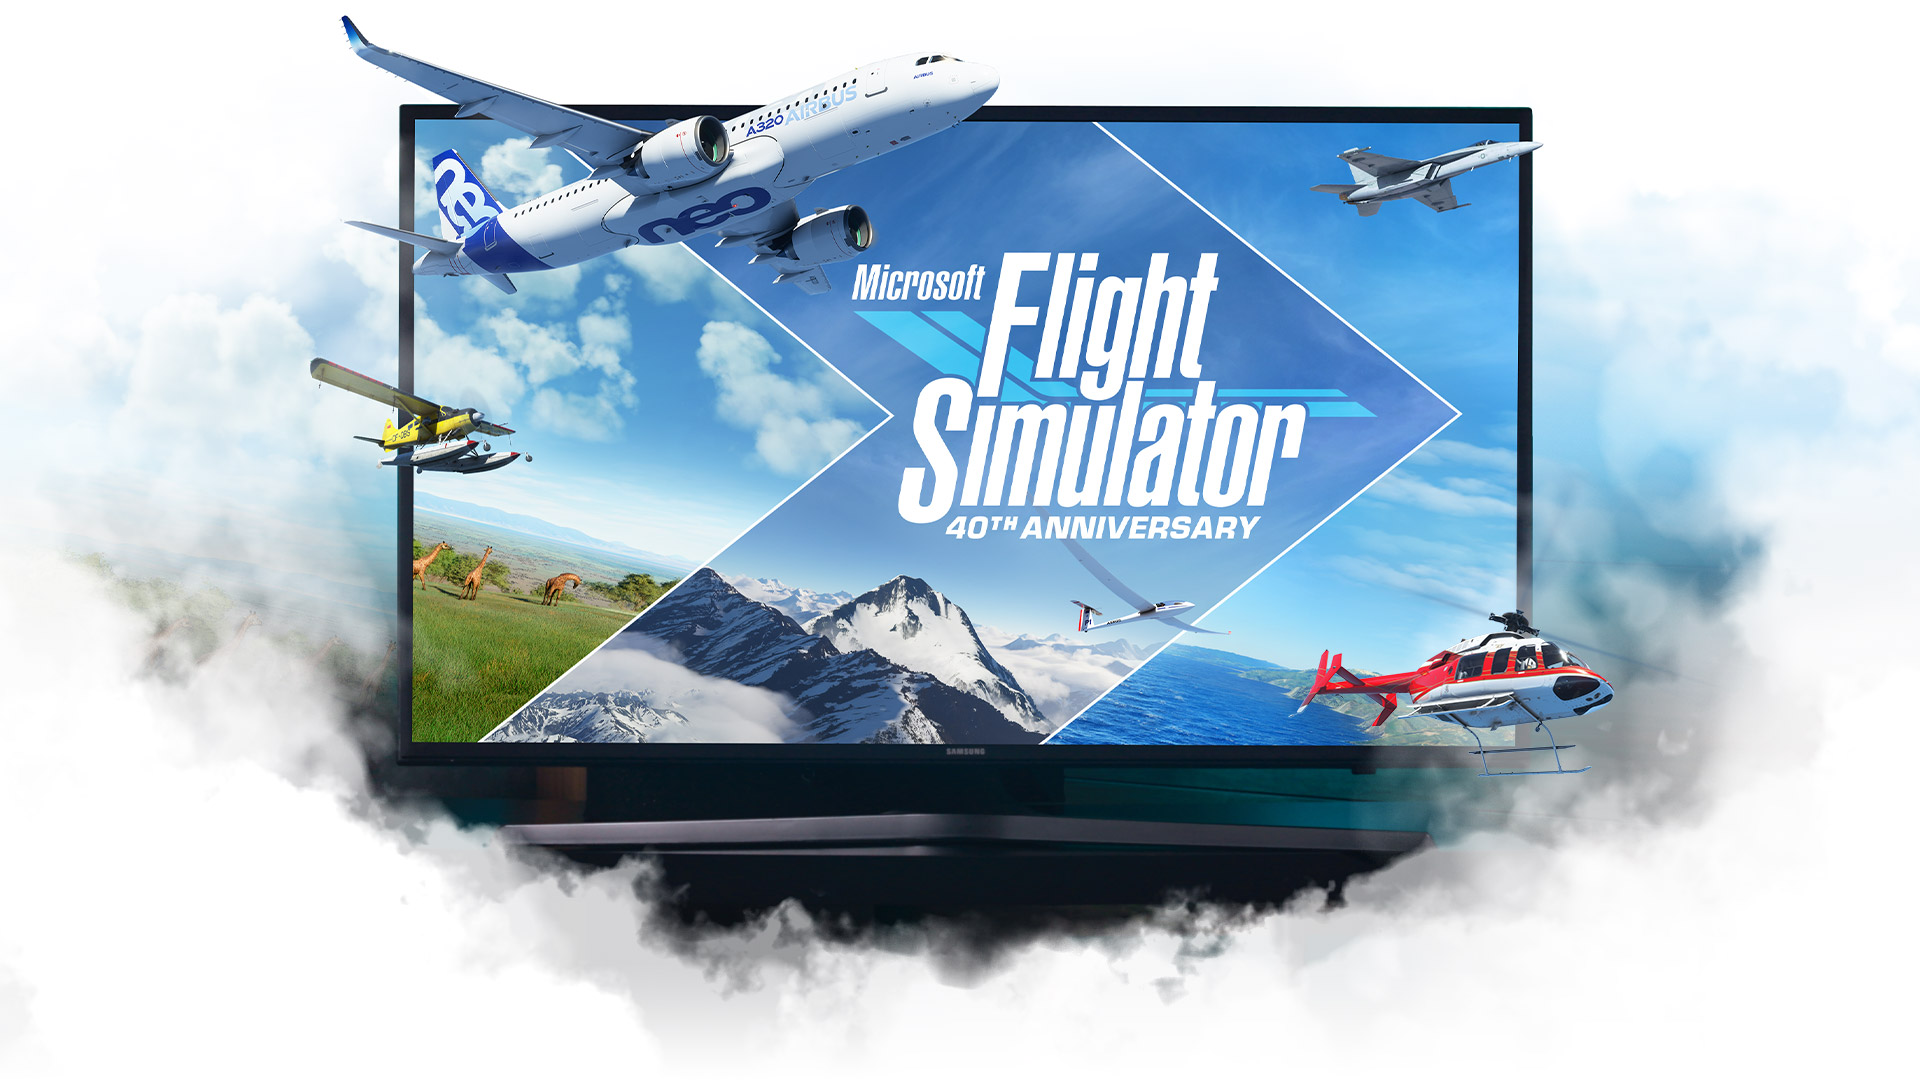 Microsoft Flight Simulator planes emerging from a TV surrounded by clouds